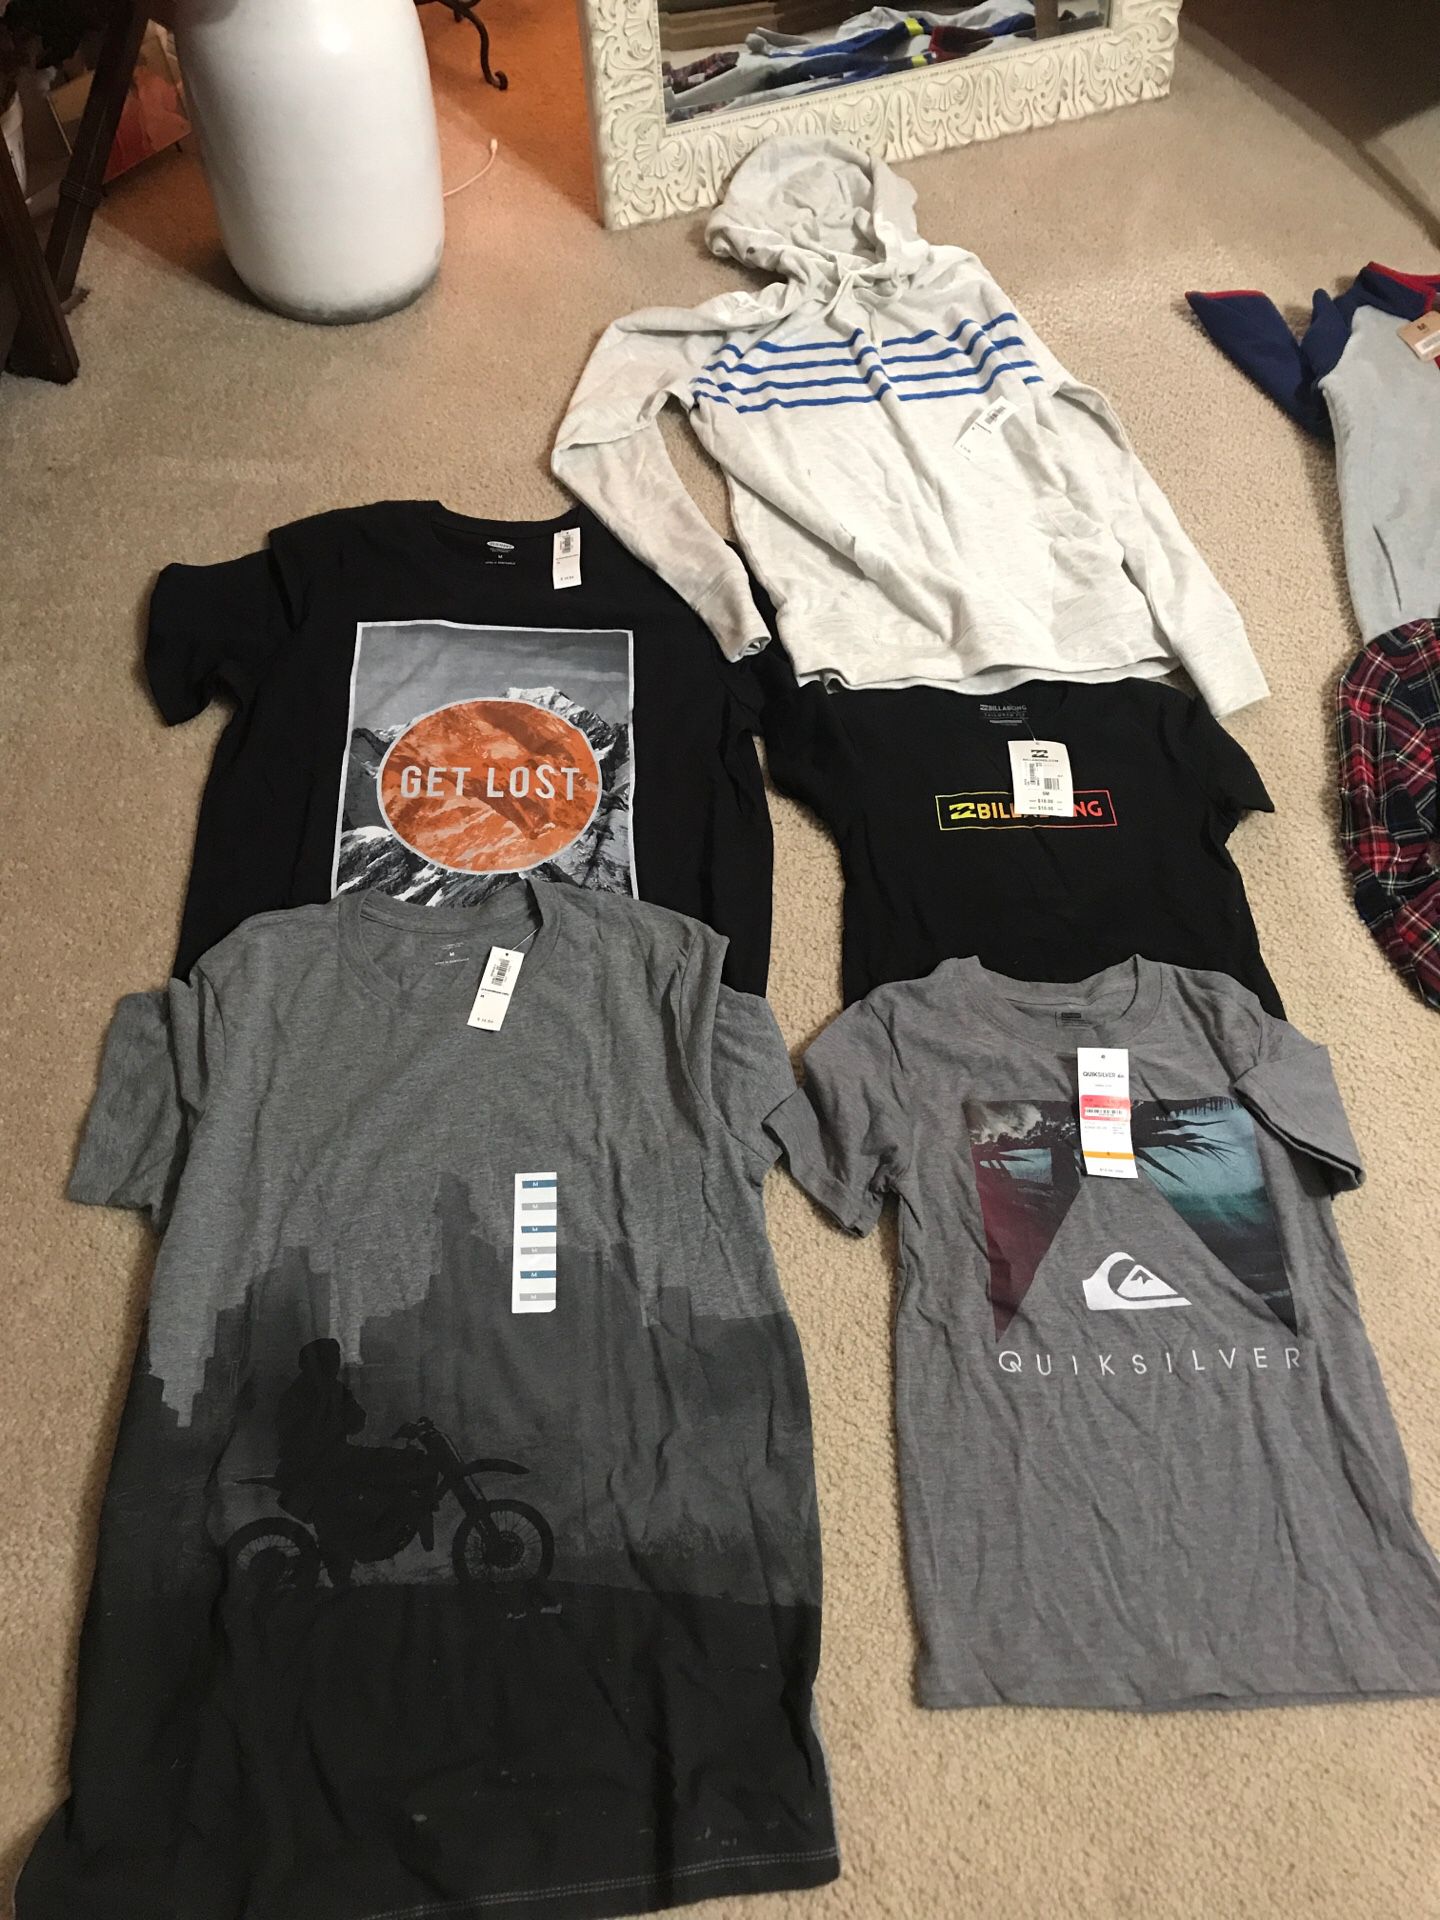 Clothing boys medium 7-8 plus two boys size small all from old navy and crazy 8 pants size 7 all brand new still have tags